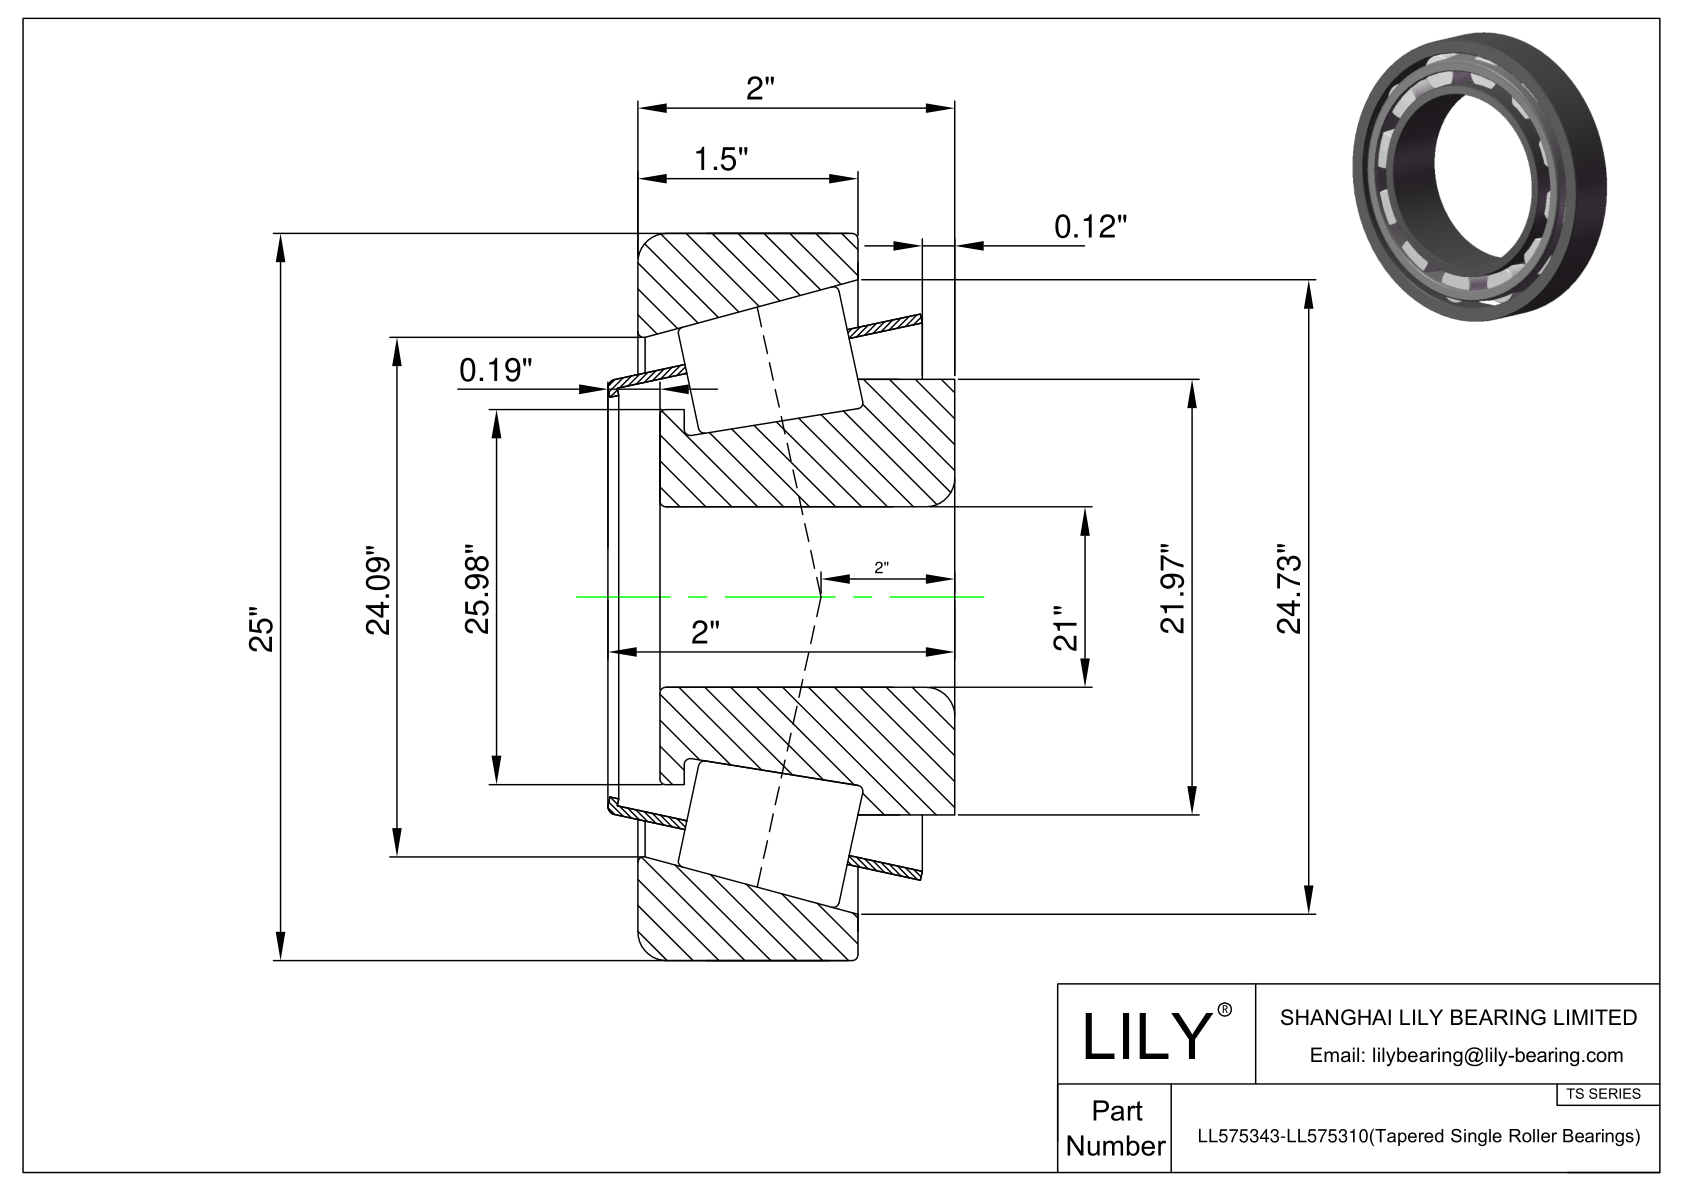 LL575343-LL575310 TS (Tapered Single Roller Bearings) (Imperial) cad drawing